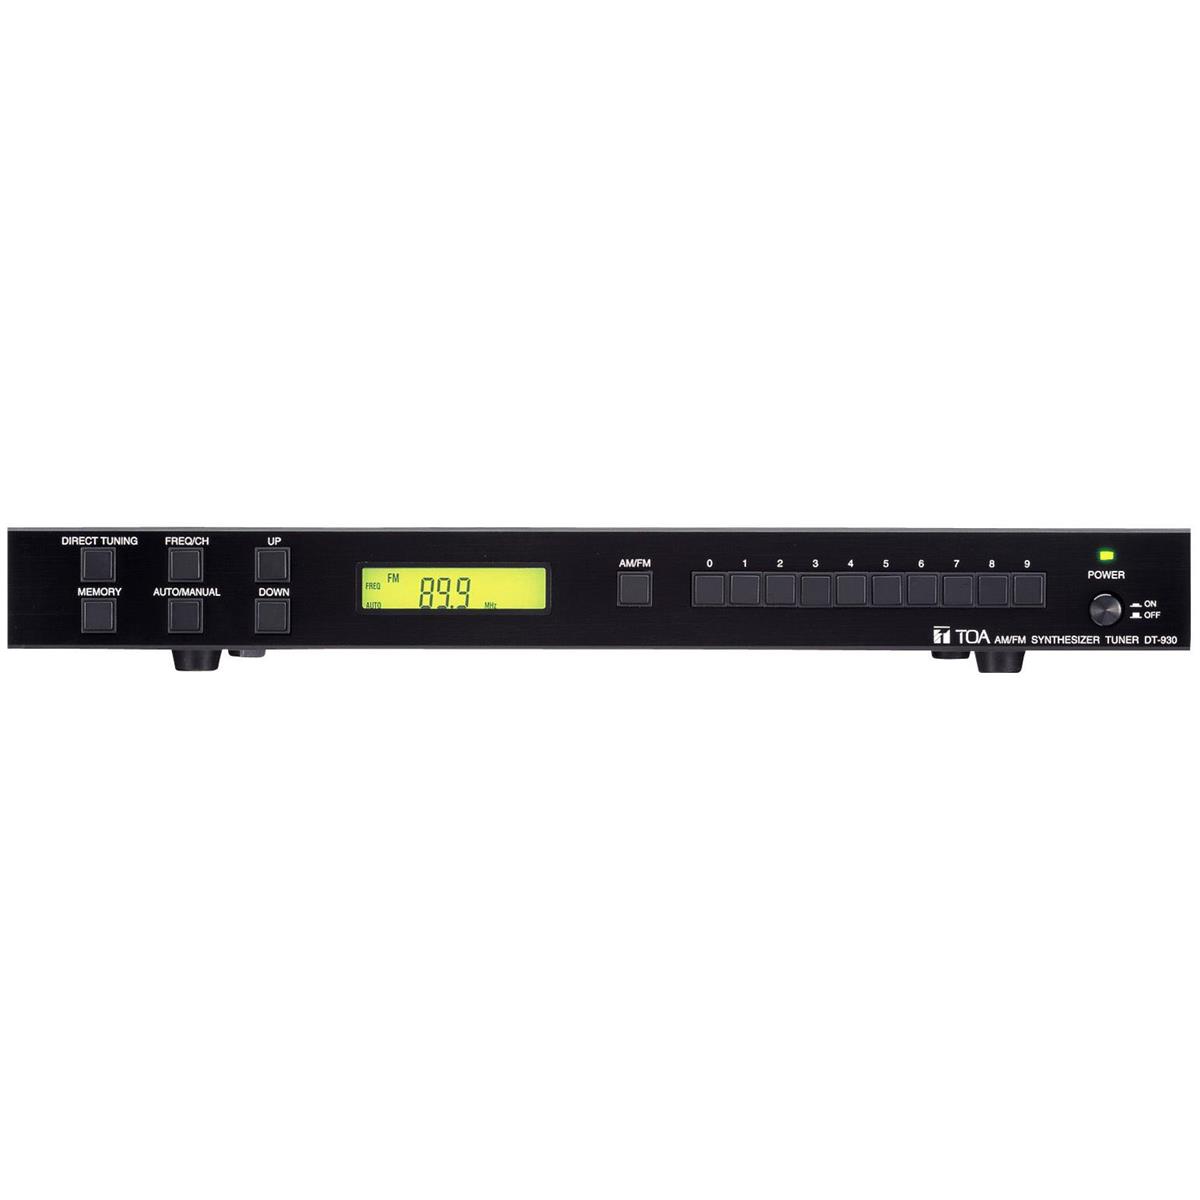 TOA Electronics DT-930 Rack-Mountable AM/FM Stereo Tuner -  DT930UL